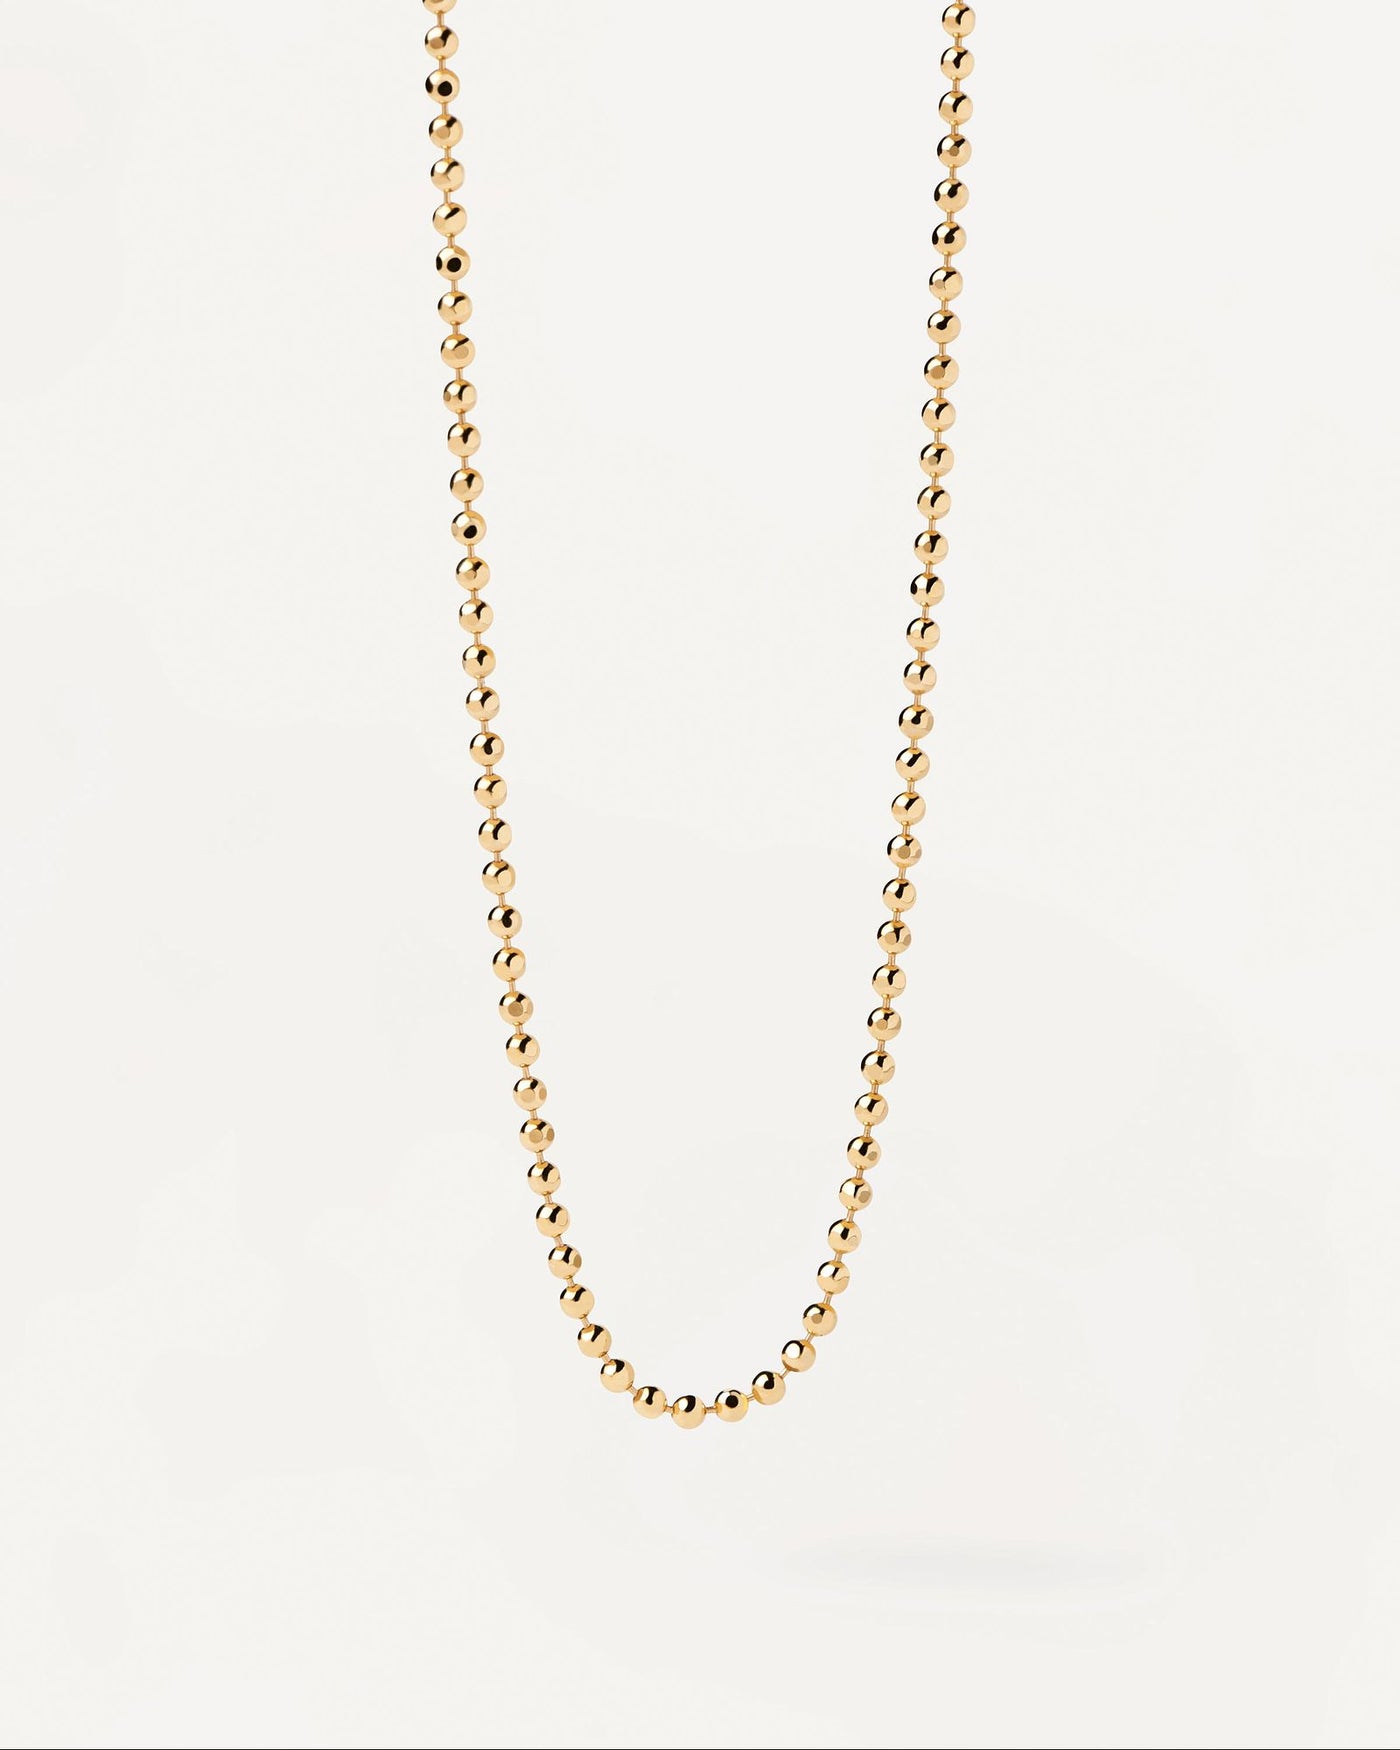 2024 Selection | Ball Chain Necklace. Ball-textured chain necklace in plain gold-plated silver. Get the latest arrival from PDPAOLA. Place your order safely and get this Best Seller. Free Shipping.